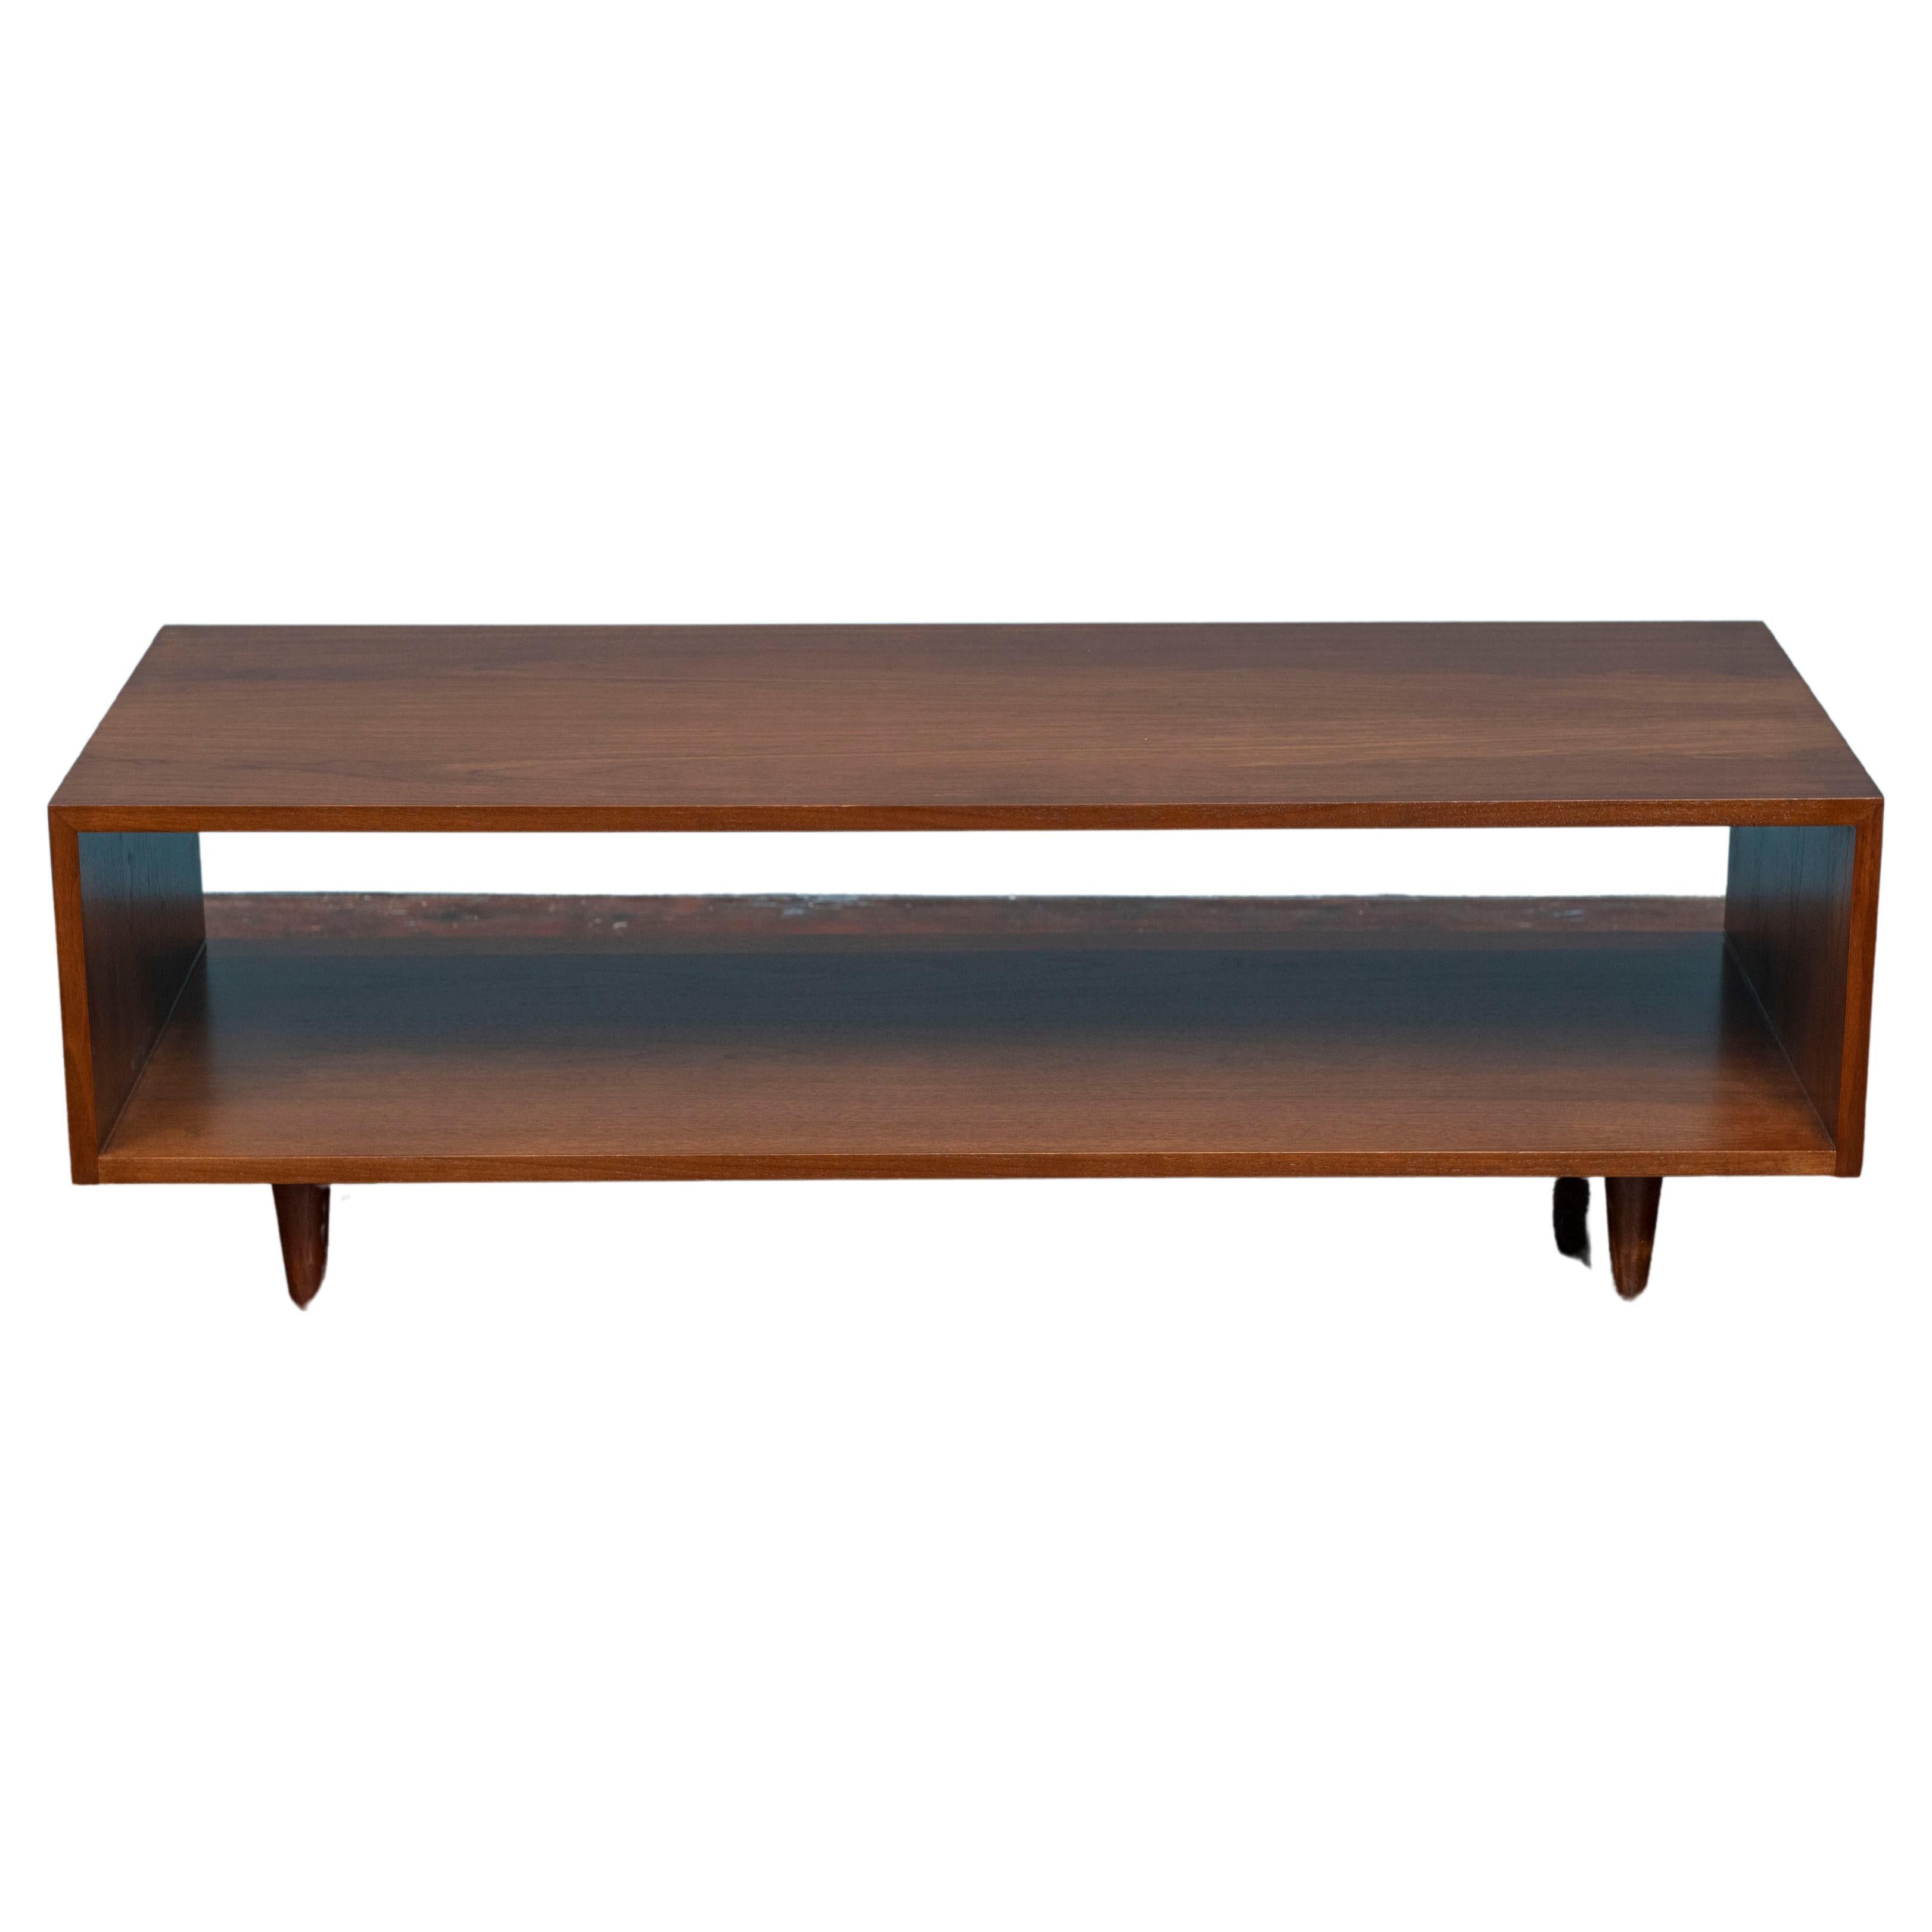 Stanley Young Coffee Table for Glenn Furniture Co.